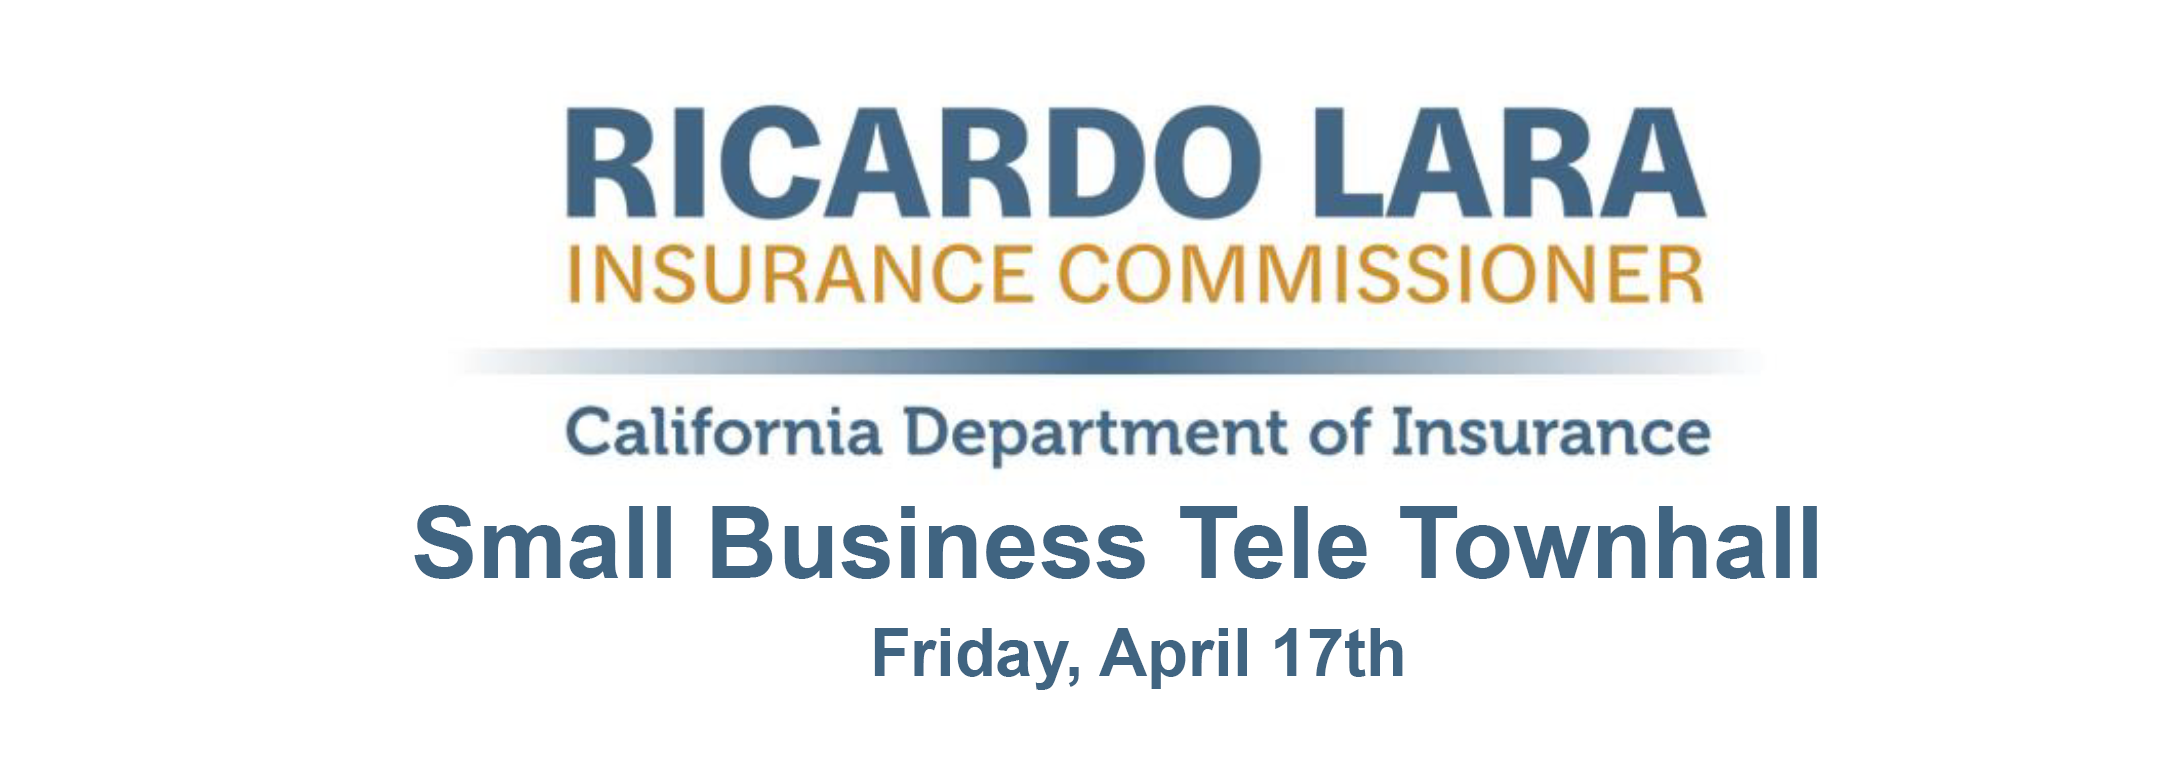 Ricardo Lara, Insurance Commissioner, California Department of Insurance. Small Business Tele Townhall on Friday April 17th.